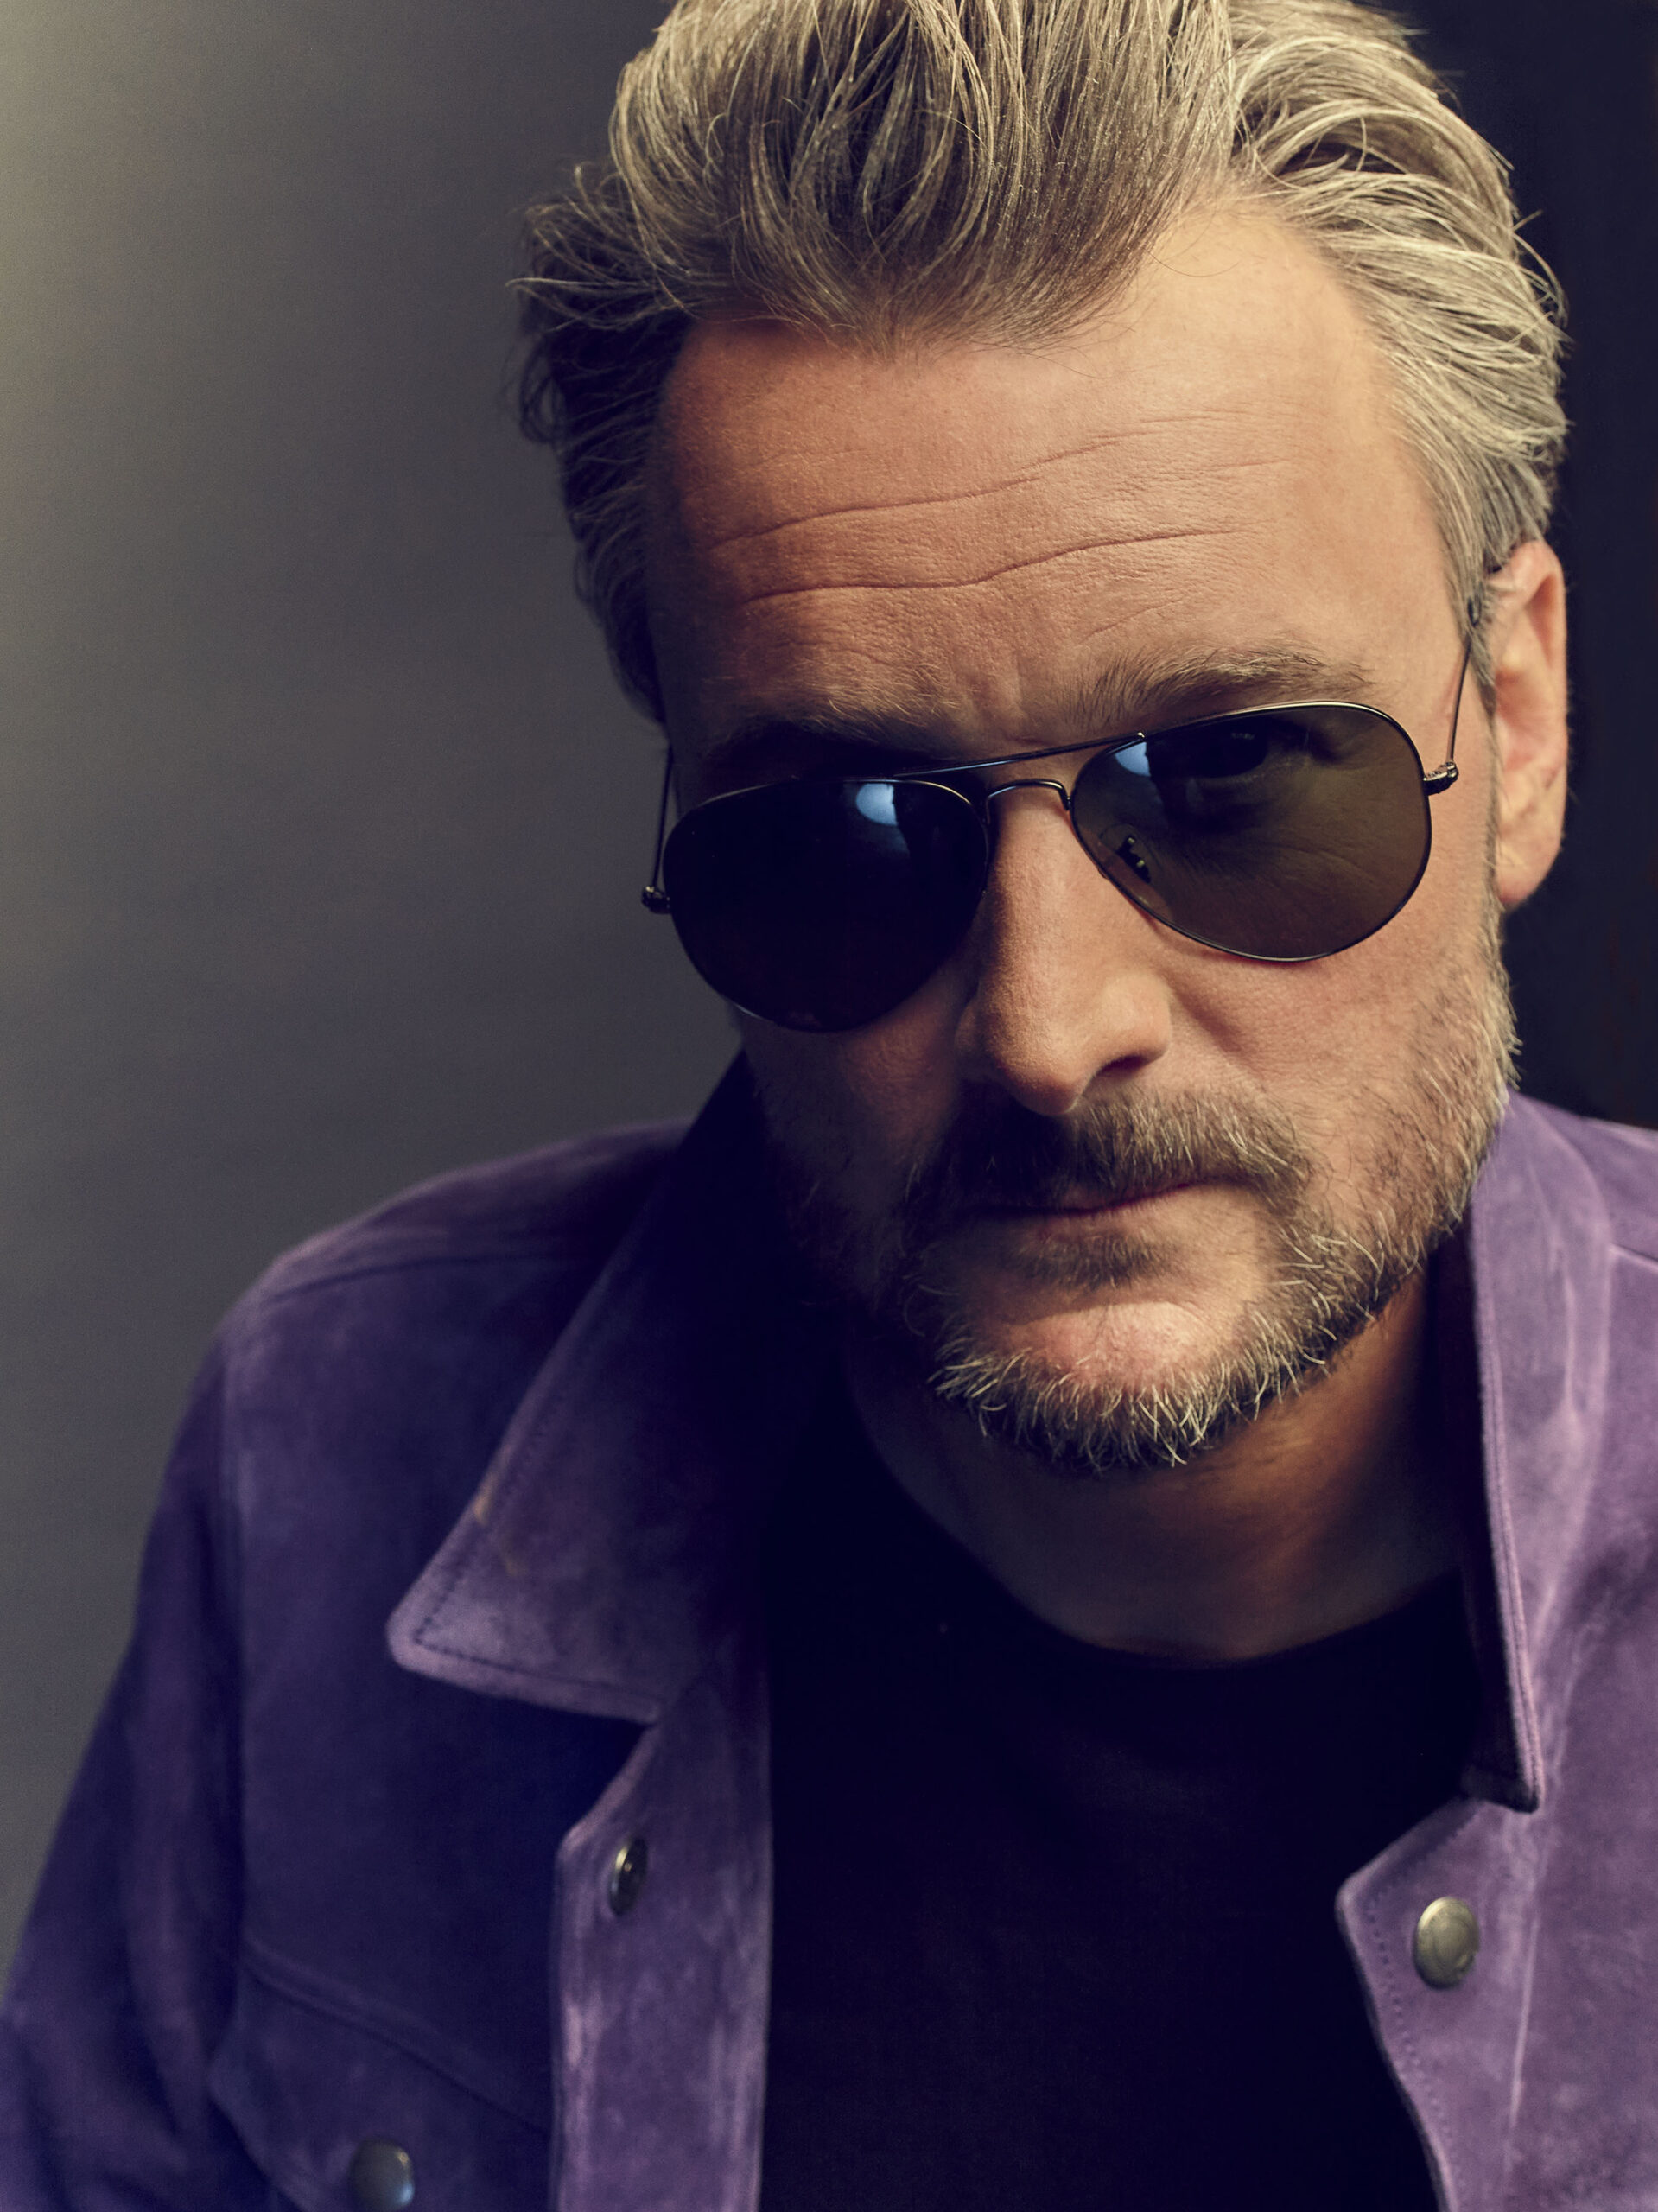 Eric Church Coming To Ubs Arena In Belmont Park Ny On December 4 Songs ...